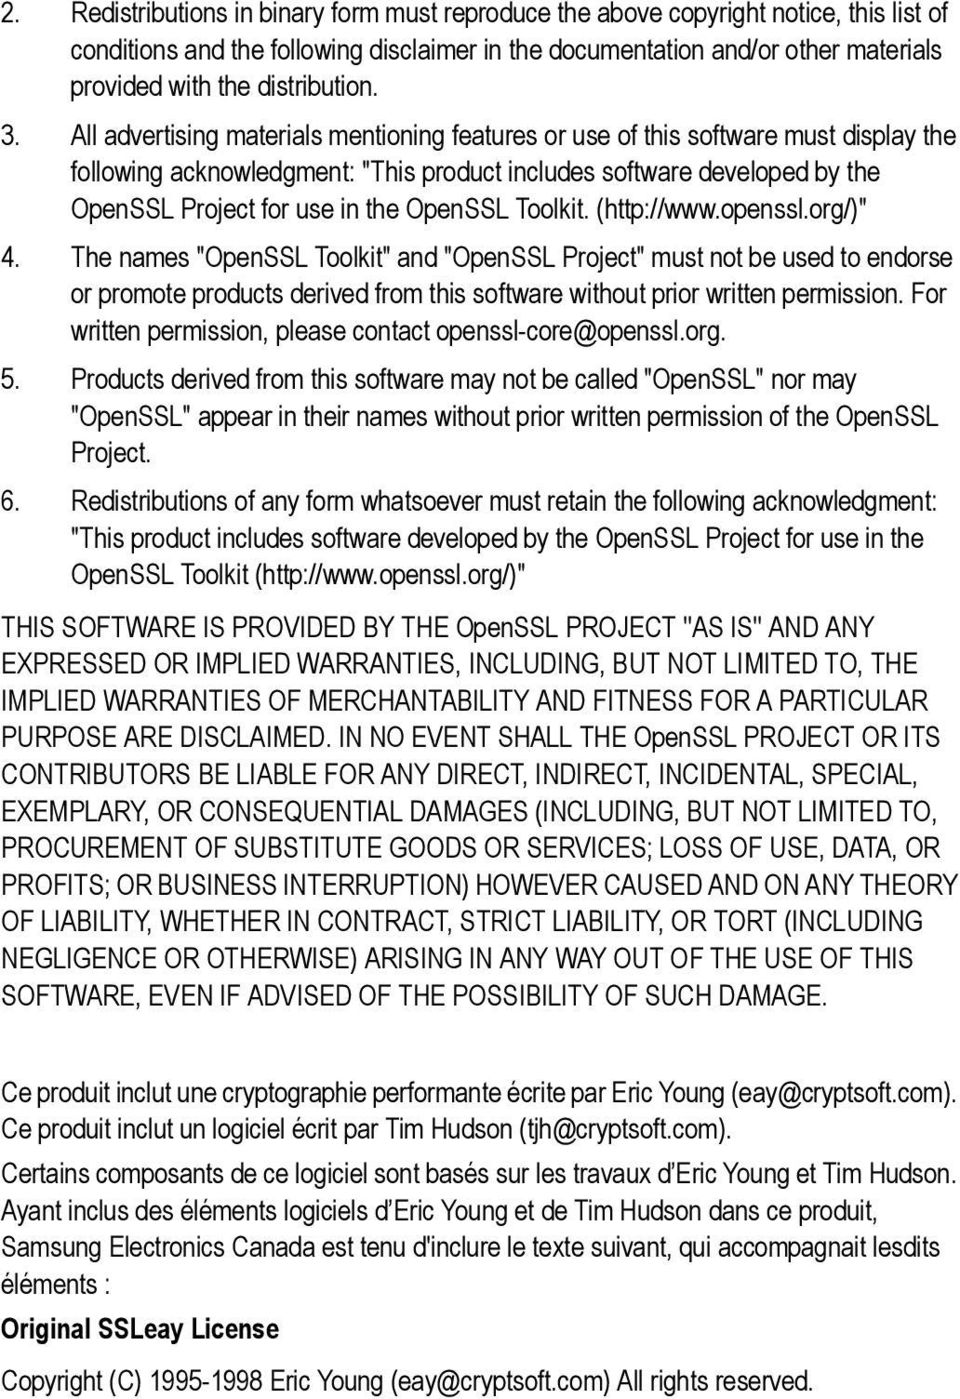 All advertising materials mentioning features or use of this software must display the following acknowledgment: "This product includes software developed by the OpenSSL Project for use in the